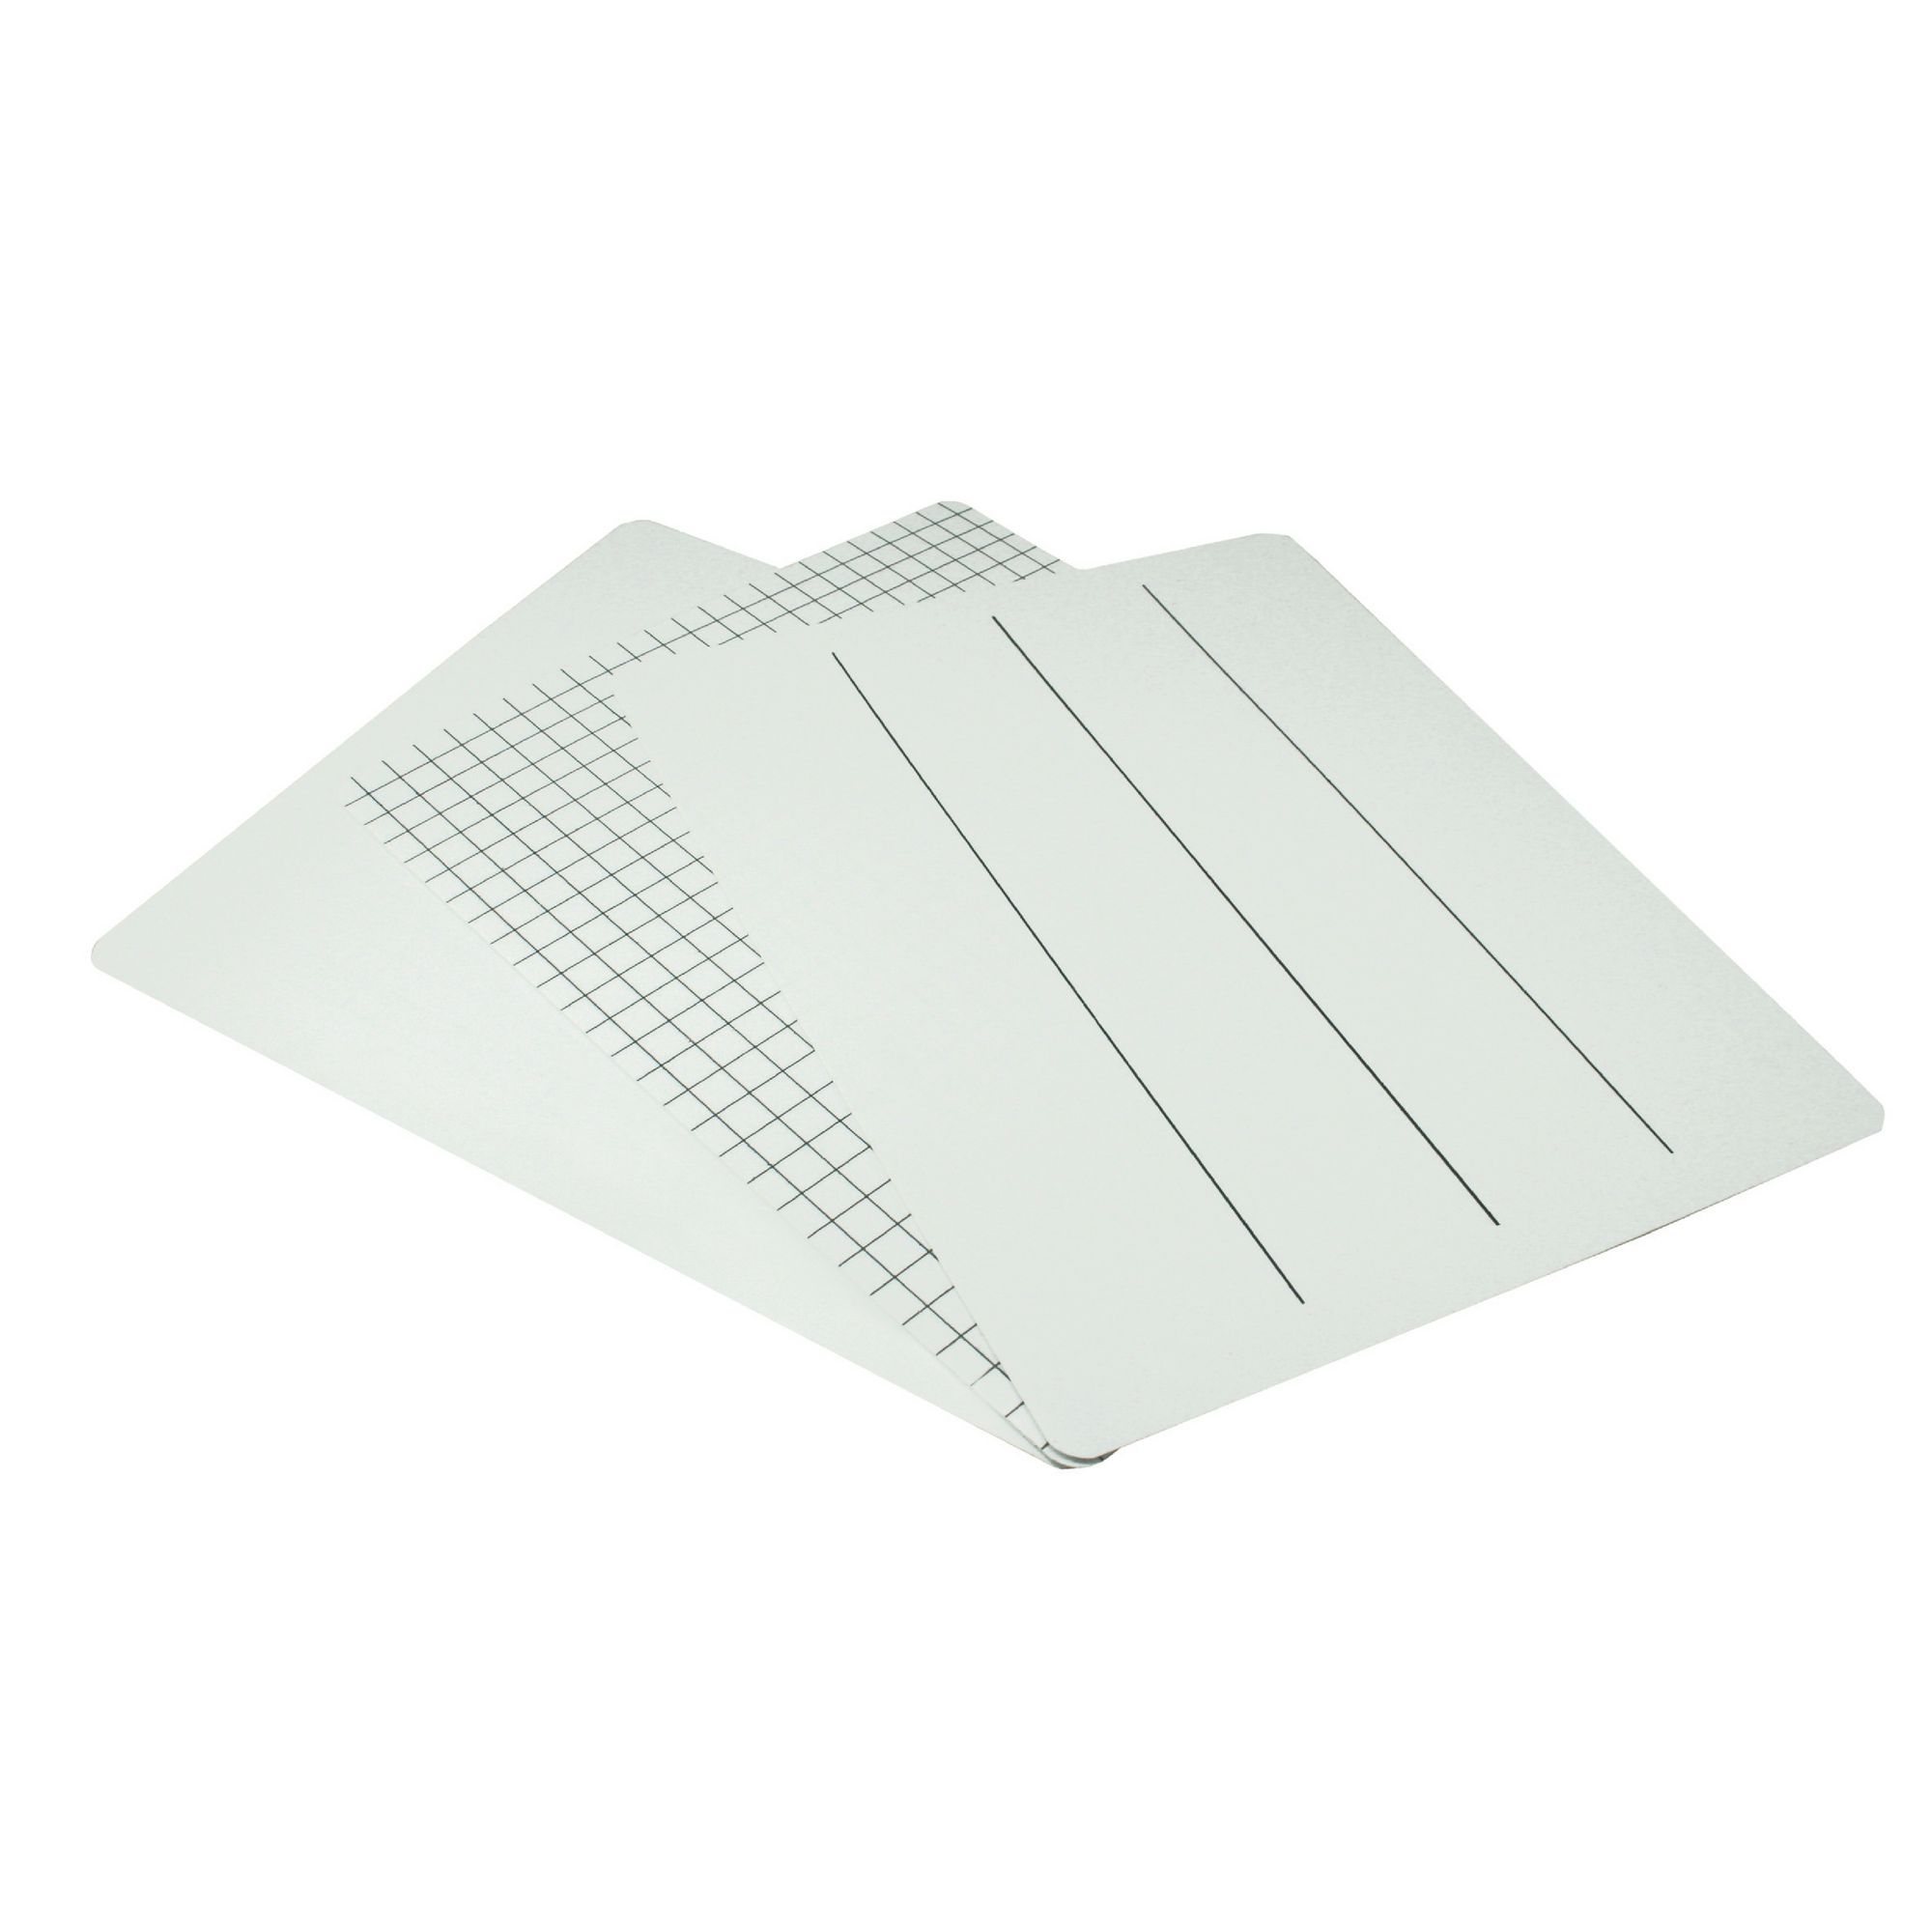 Classmates Lightweight Whiteboards - Non-magnetic - A4 Plain - Pack 10